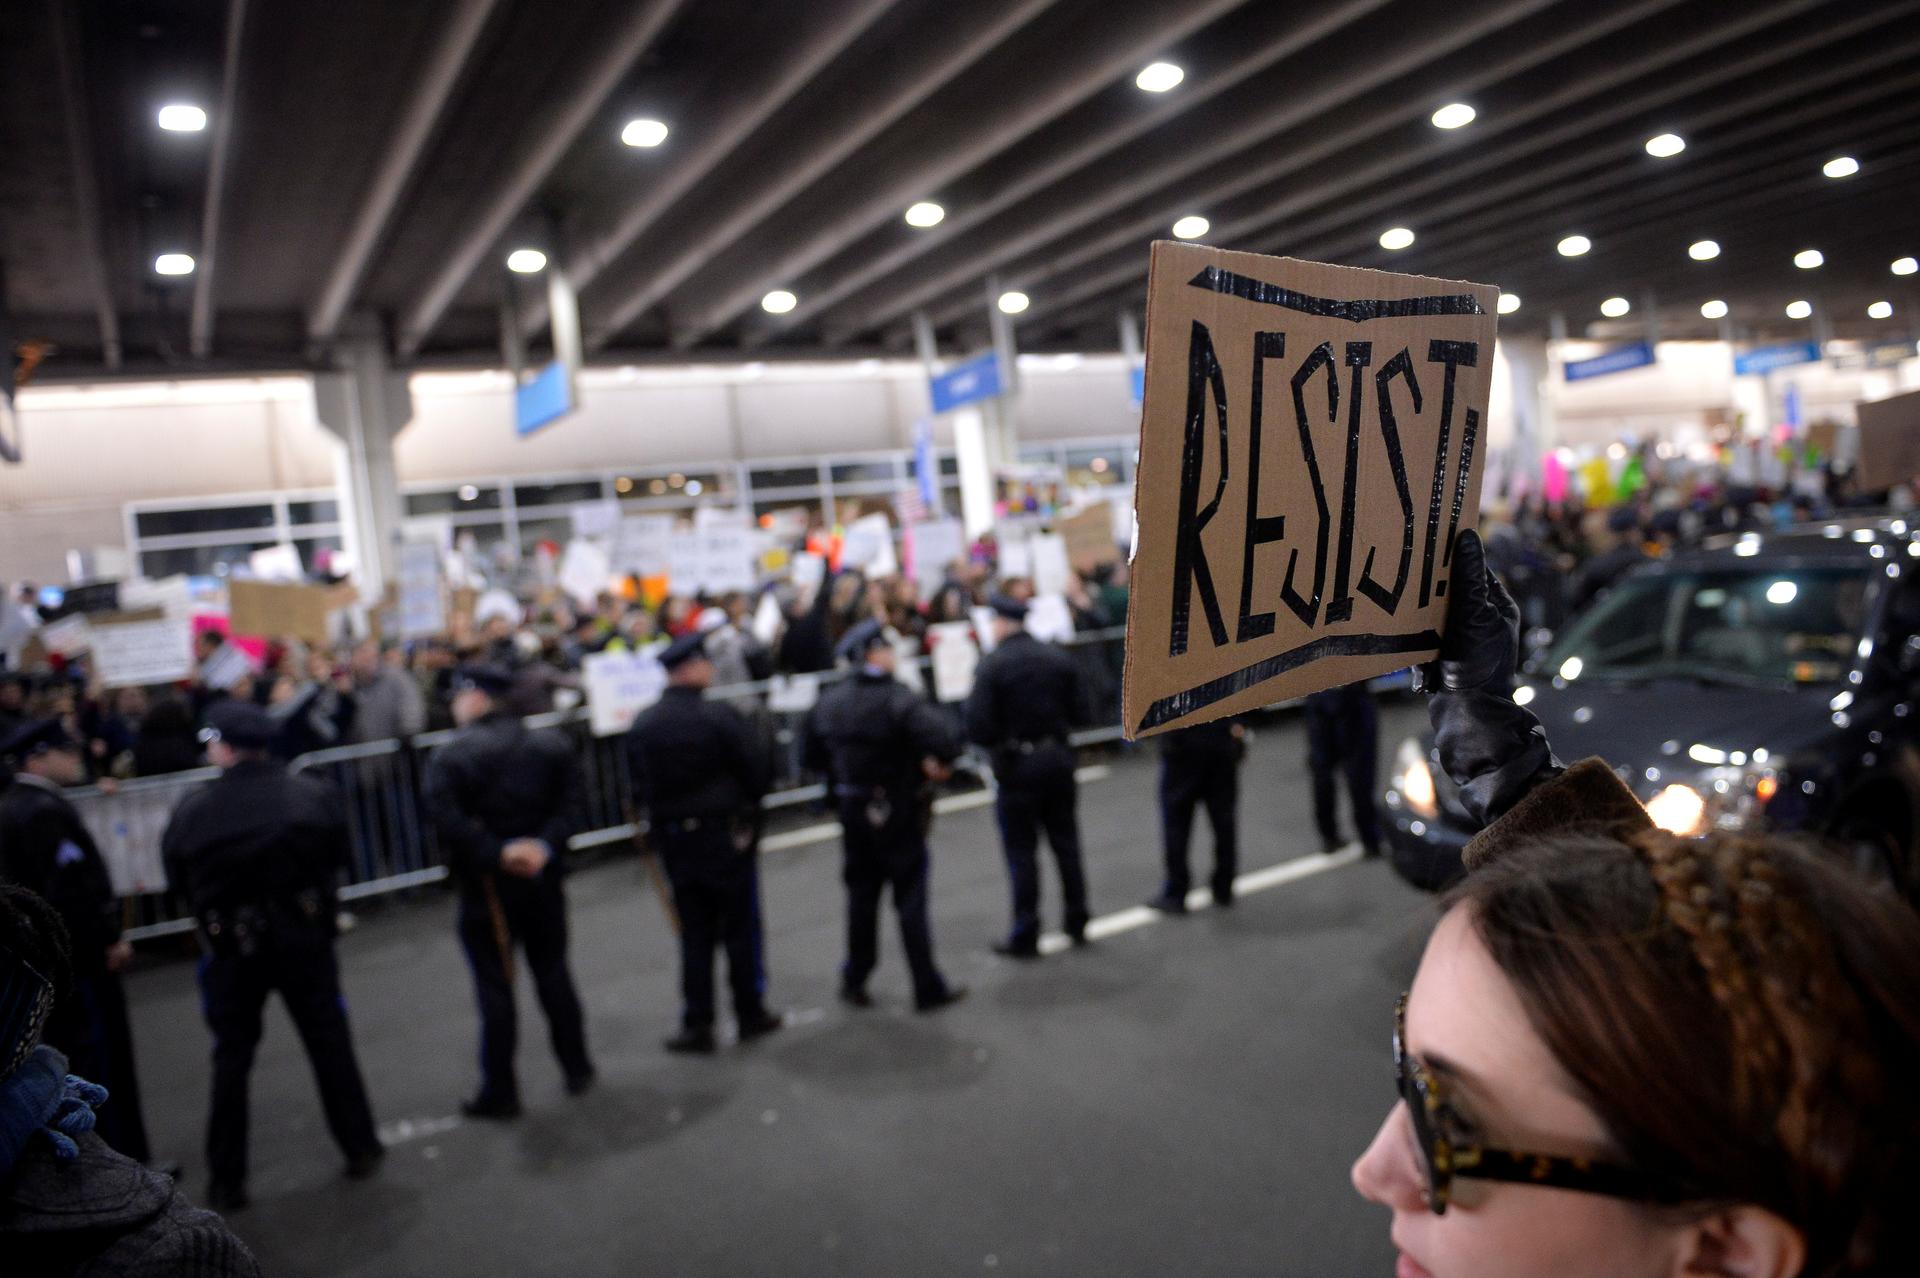 A demonstrator holds a "resist" sign during anti-Donald Trump travel ban protests outside Philadelphia International Airport in Philadelphia, Pennsylvania, U.S., January 29, 2017.